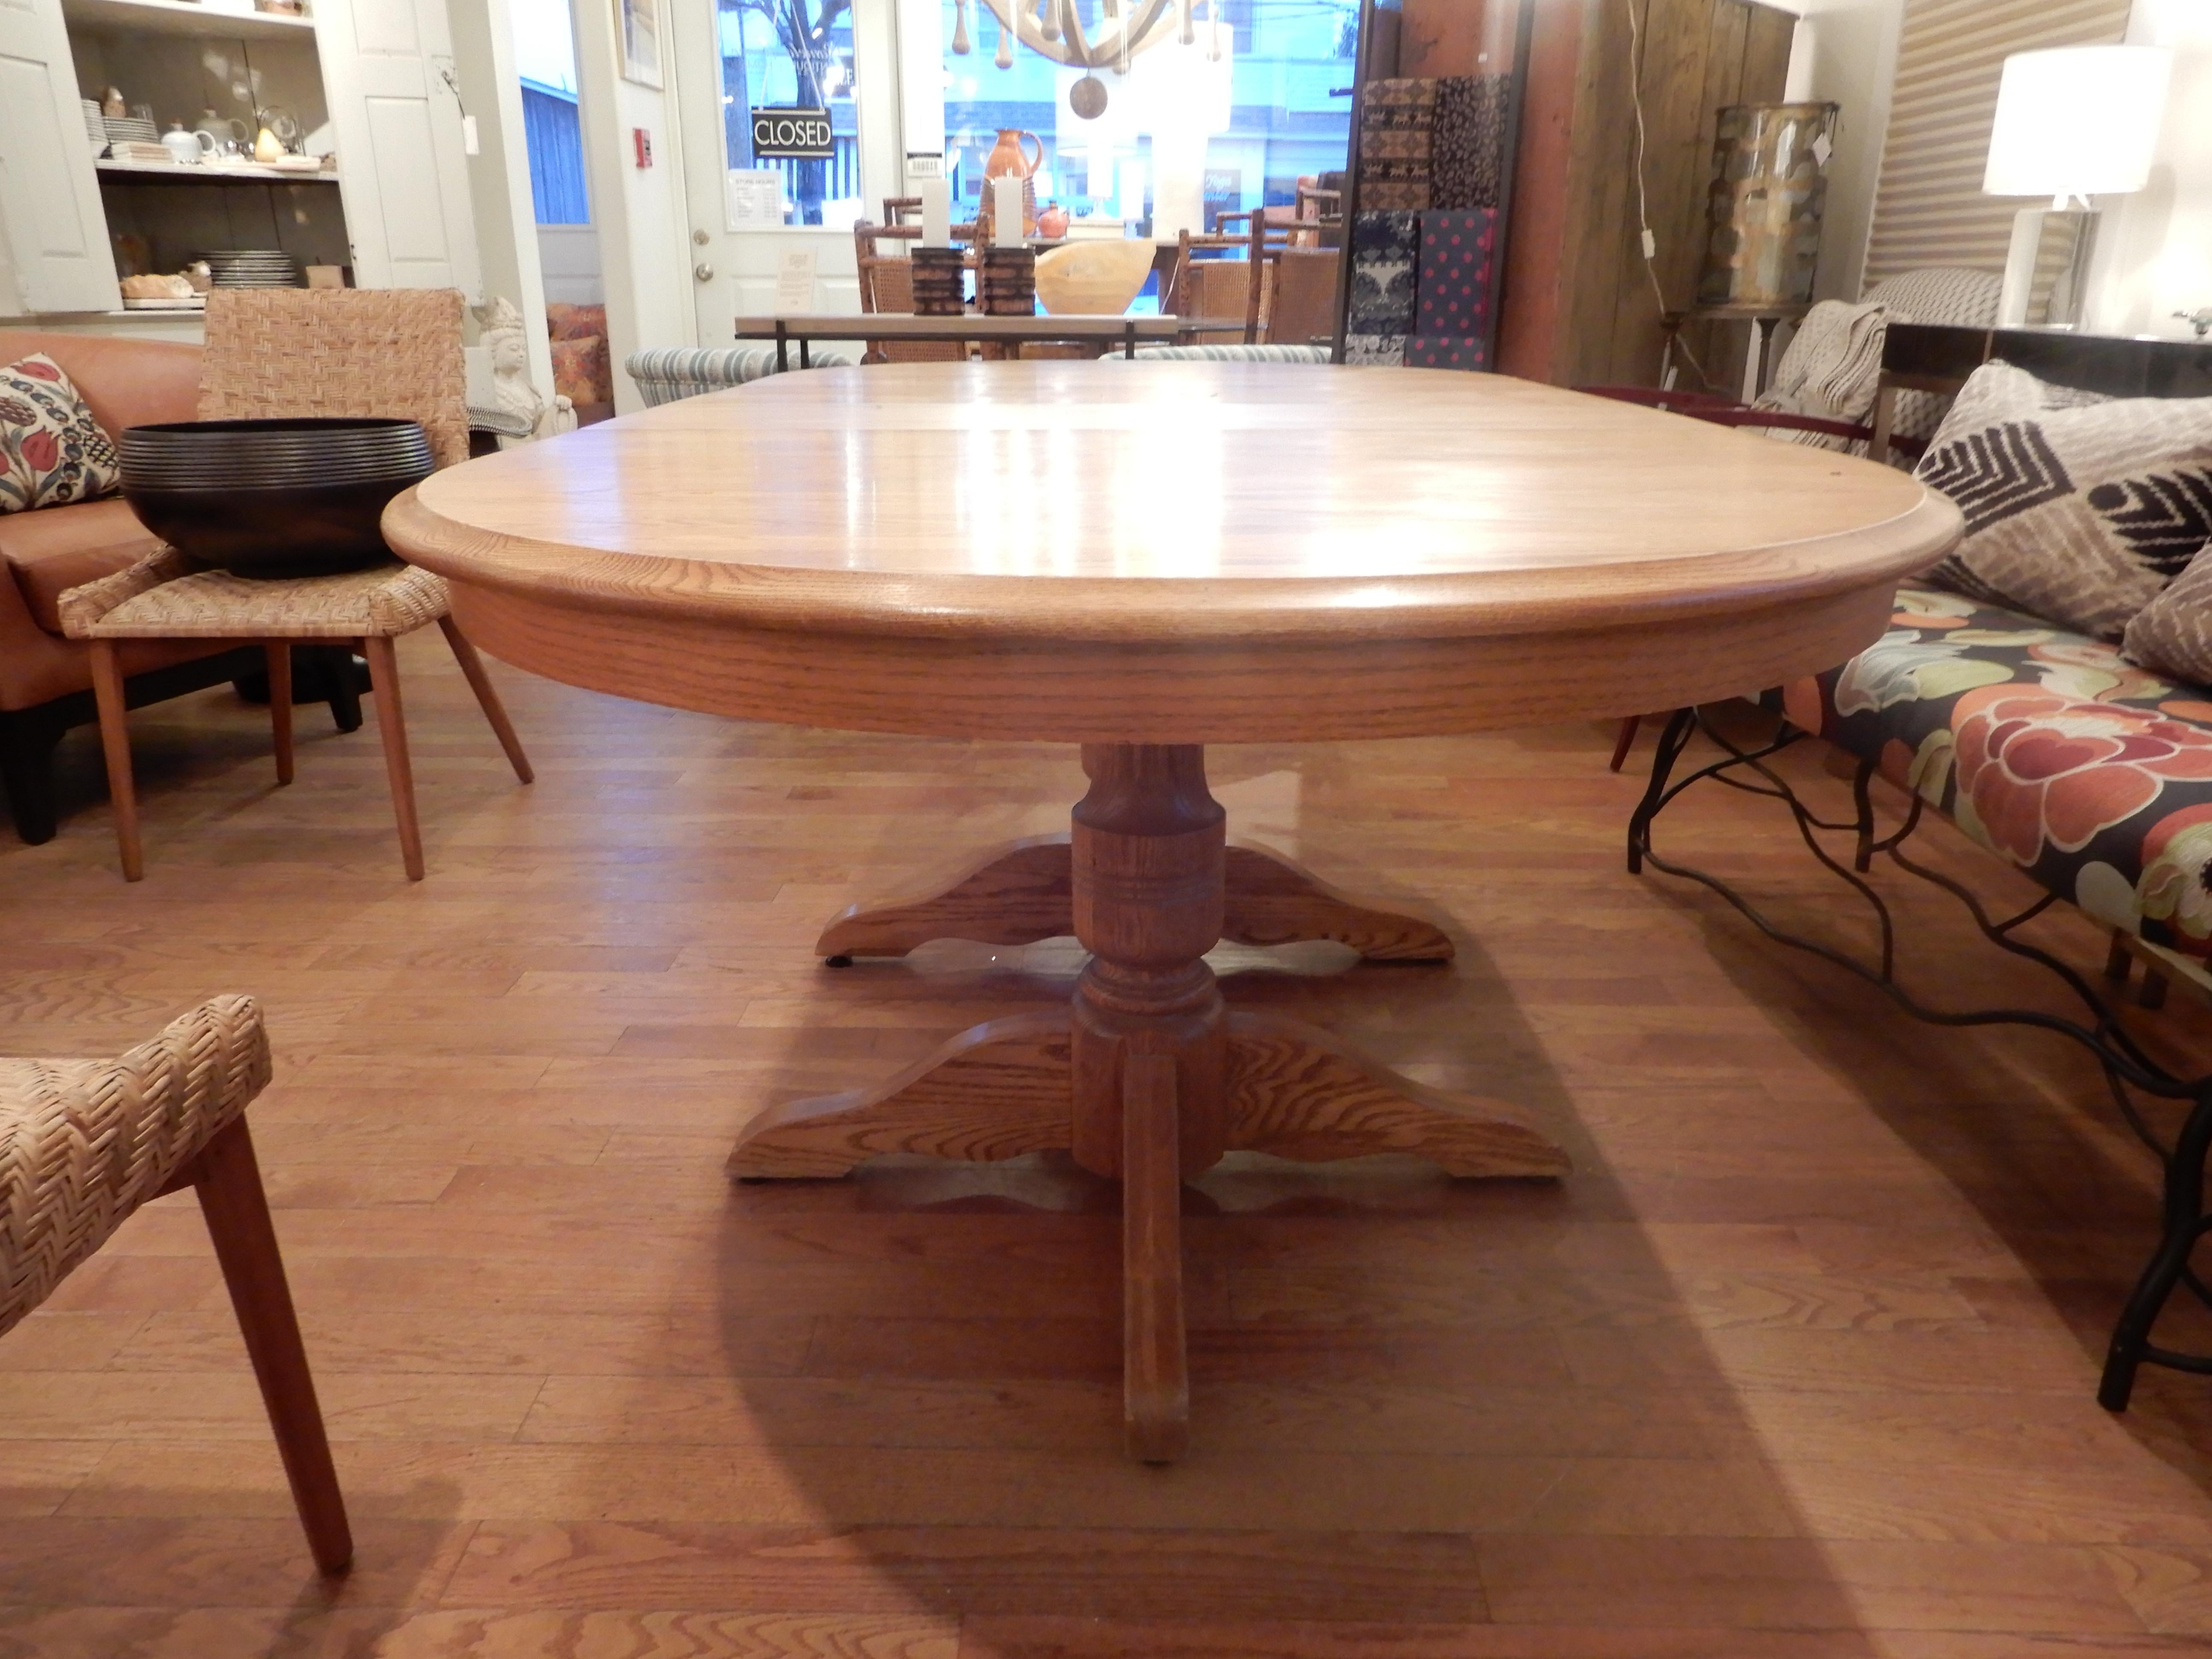 A two column solid white oak Americana dining room table, the table measures 82 inches with both leaves in, without the leaves the length is 60 inches (closed) and oval in shape. All beautifully hand crafted and good condition. Seats 8 comfortably.